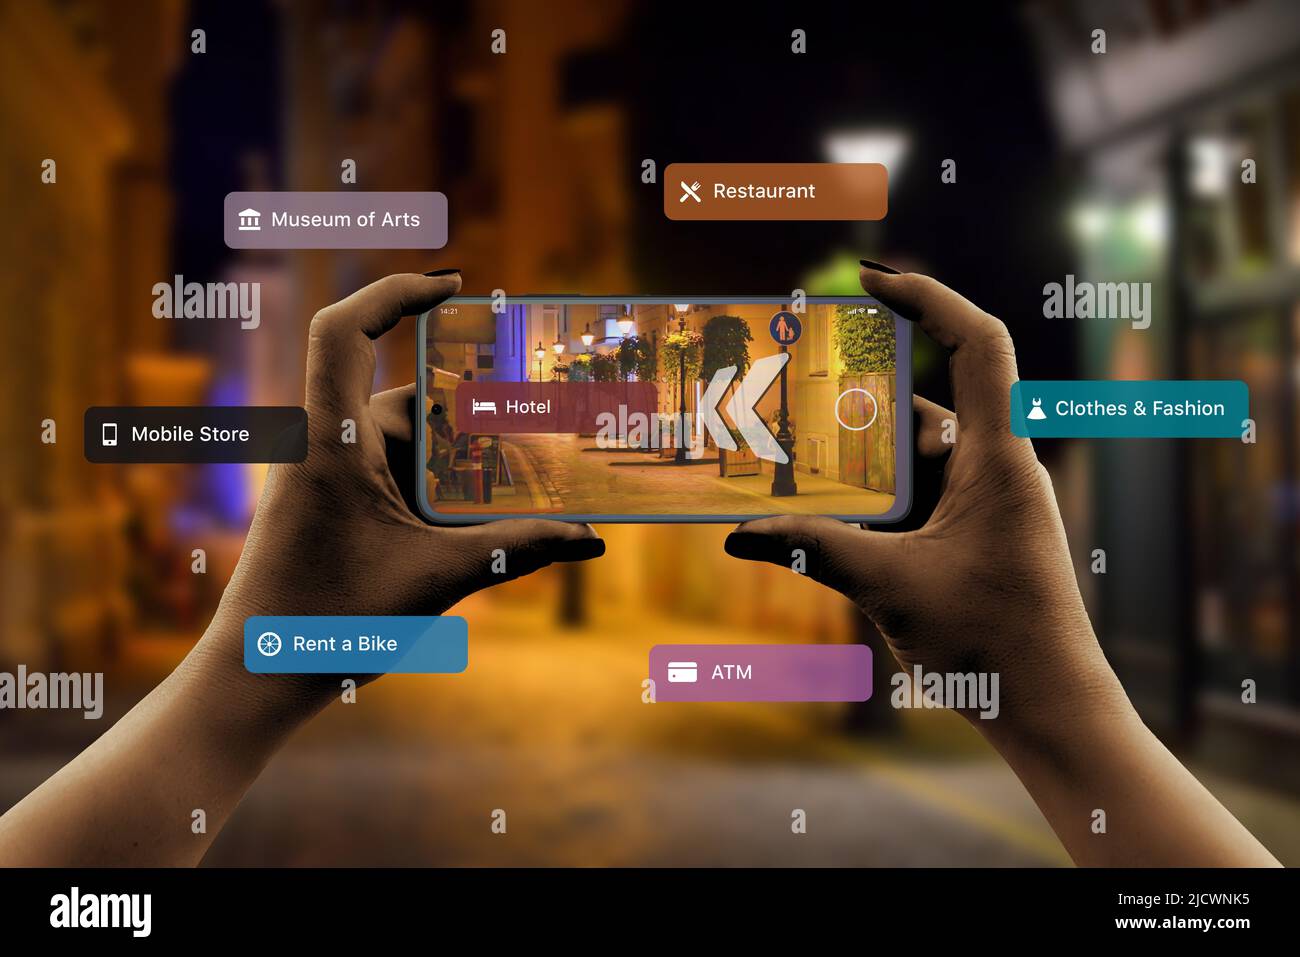 Finding hotels and other tourist facilities in the city with 3d navigation app based on augmented reality technology concept. Smartphone in a horizont Stock Photo